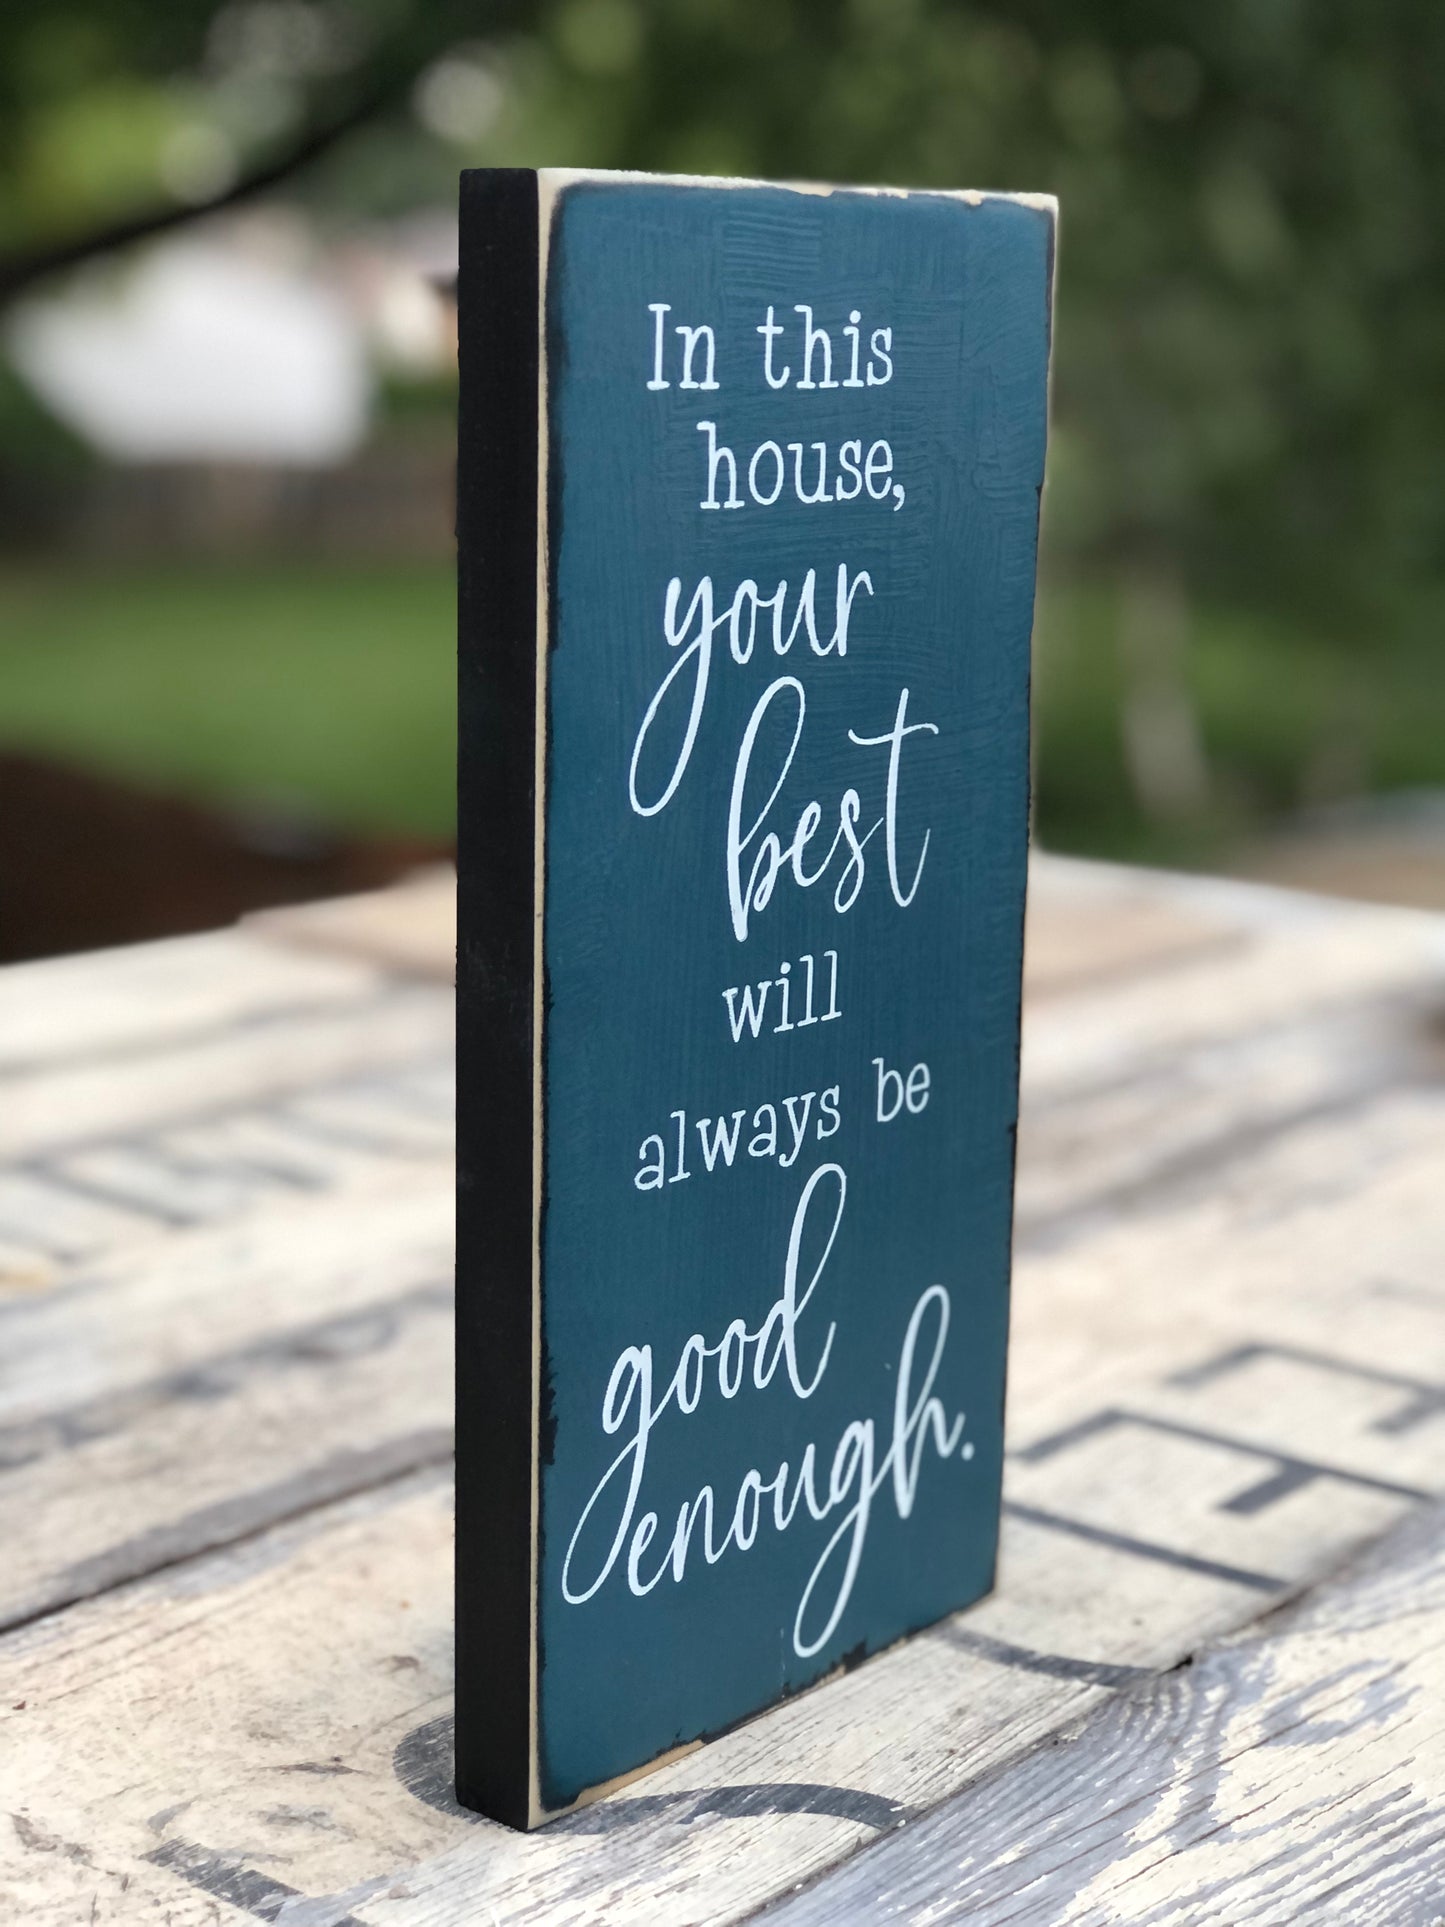 IN THIS HOUSE YOUR BEST WILL ALWAYS BE GOOD ENOUGH - WOOD SIGN